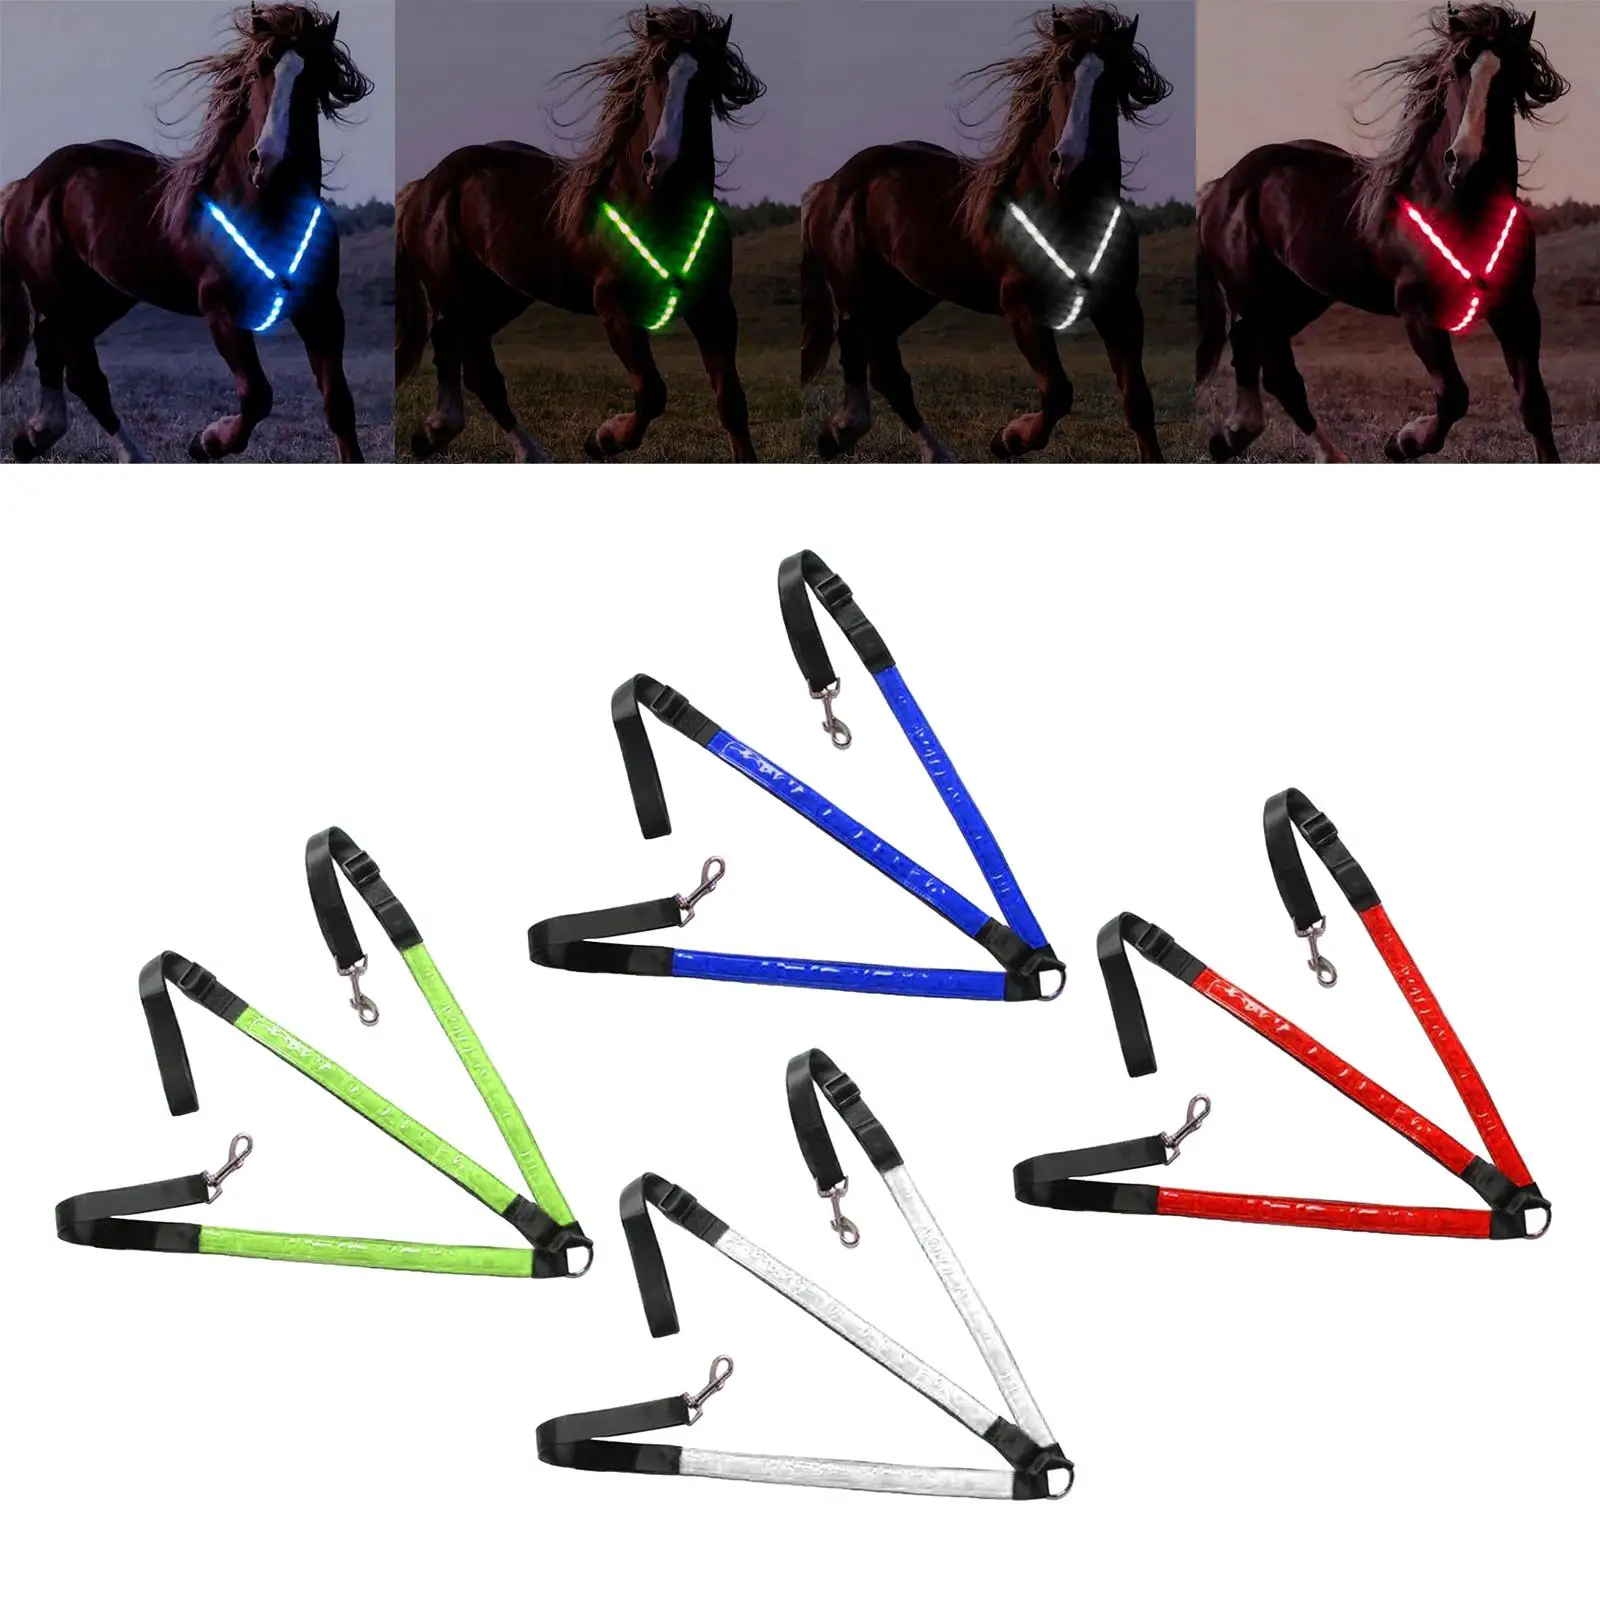 LED Horse Breastplate Collar Battery Operated Equestrian Safety Equipment High Visibility Tack 3 Lighting Modes  for Horse Show